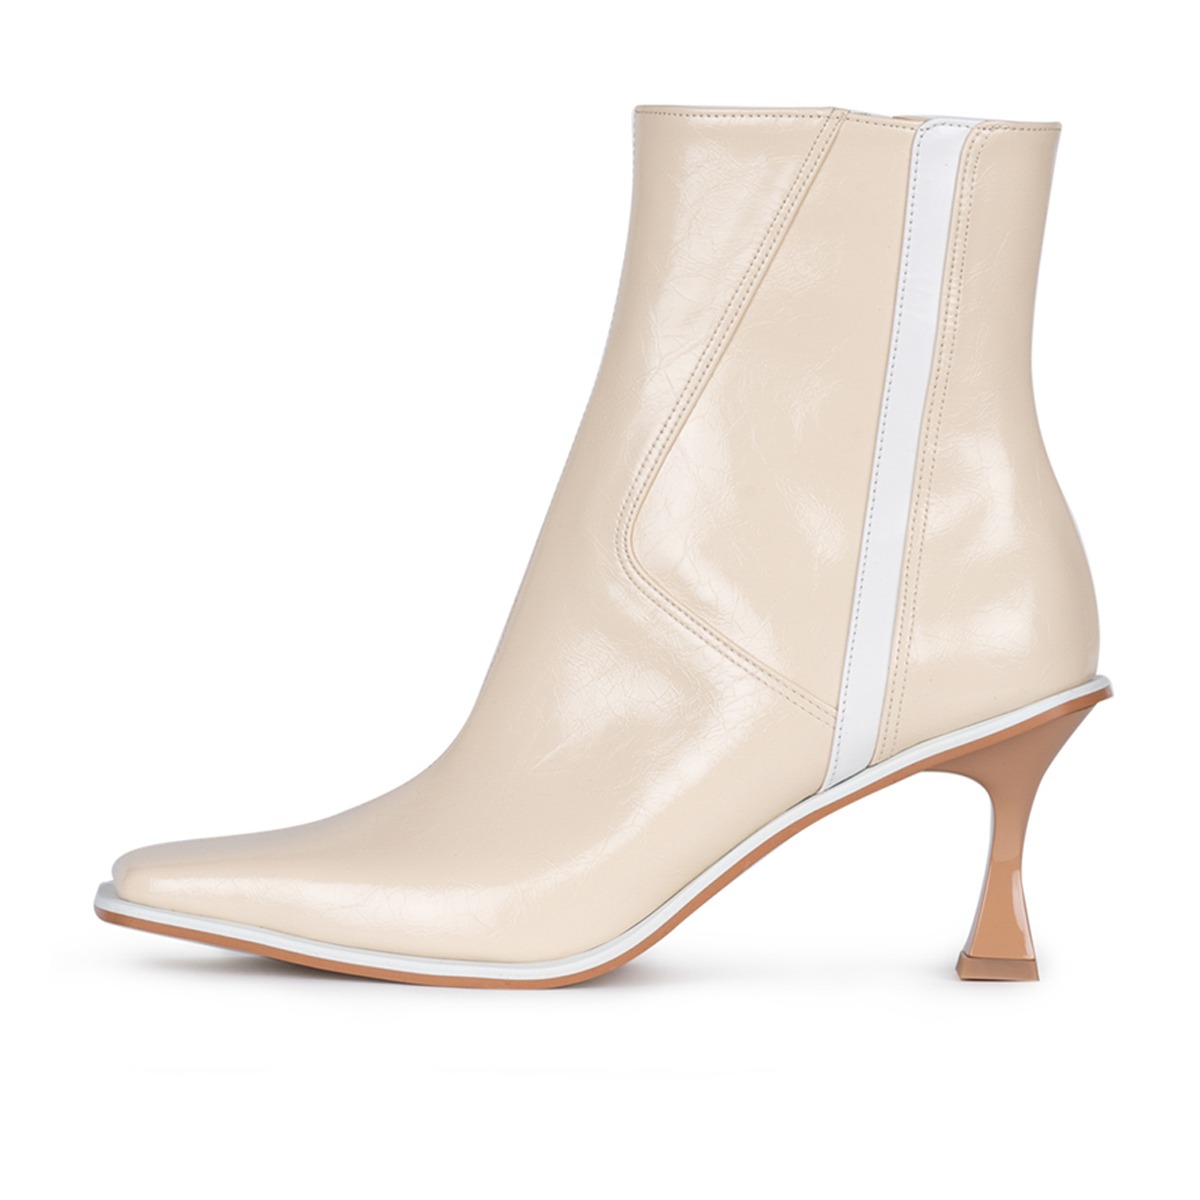 TOKYO ankle boots (Ivory)